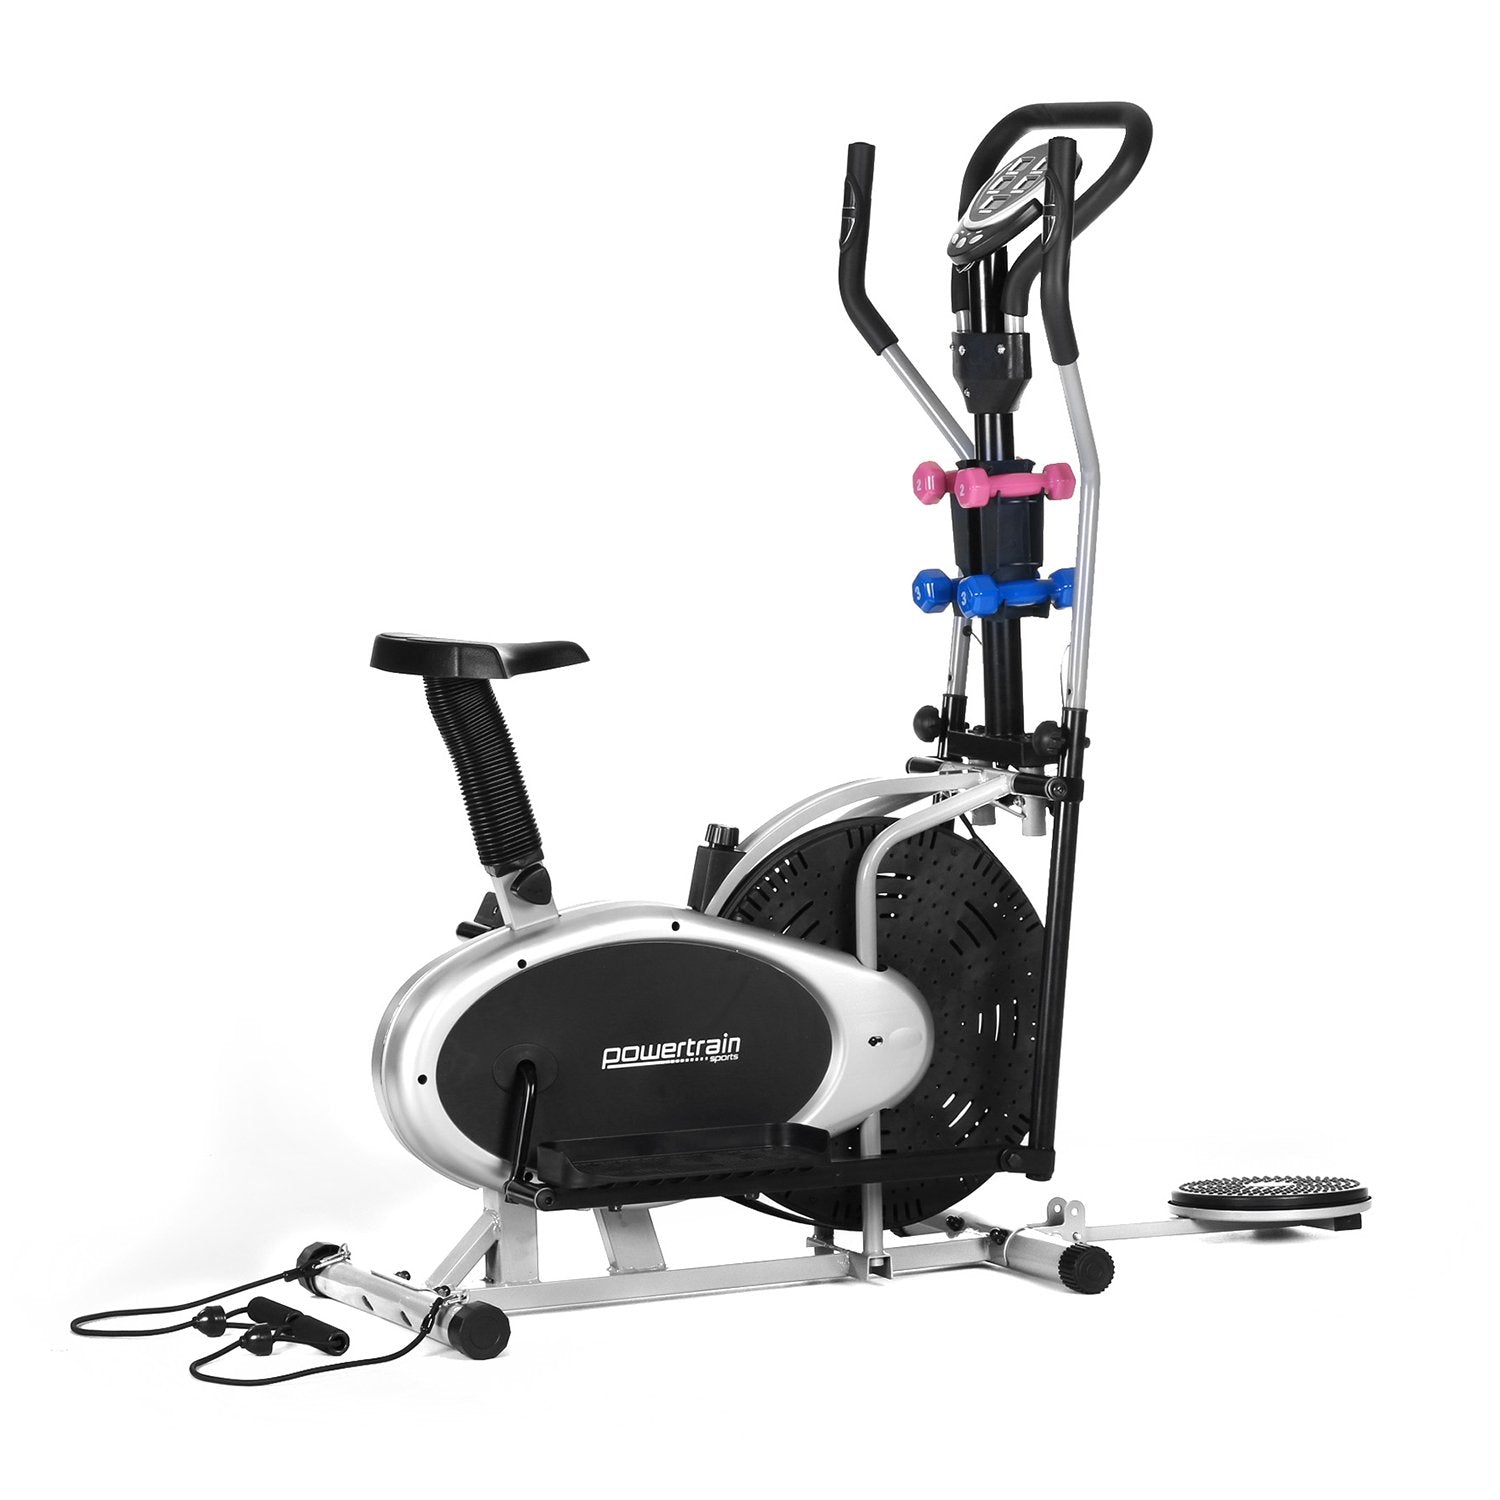 Powertrain 6-in-1 Elliptical Cross Trainer Bike with Weights and Twist Disc - SILBERSHELL